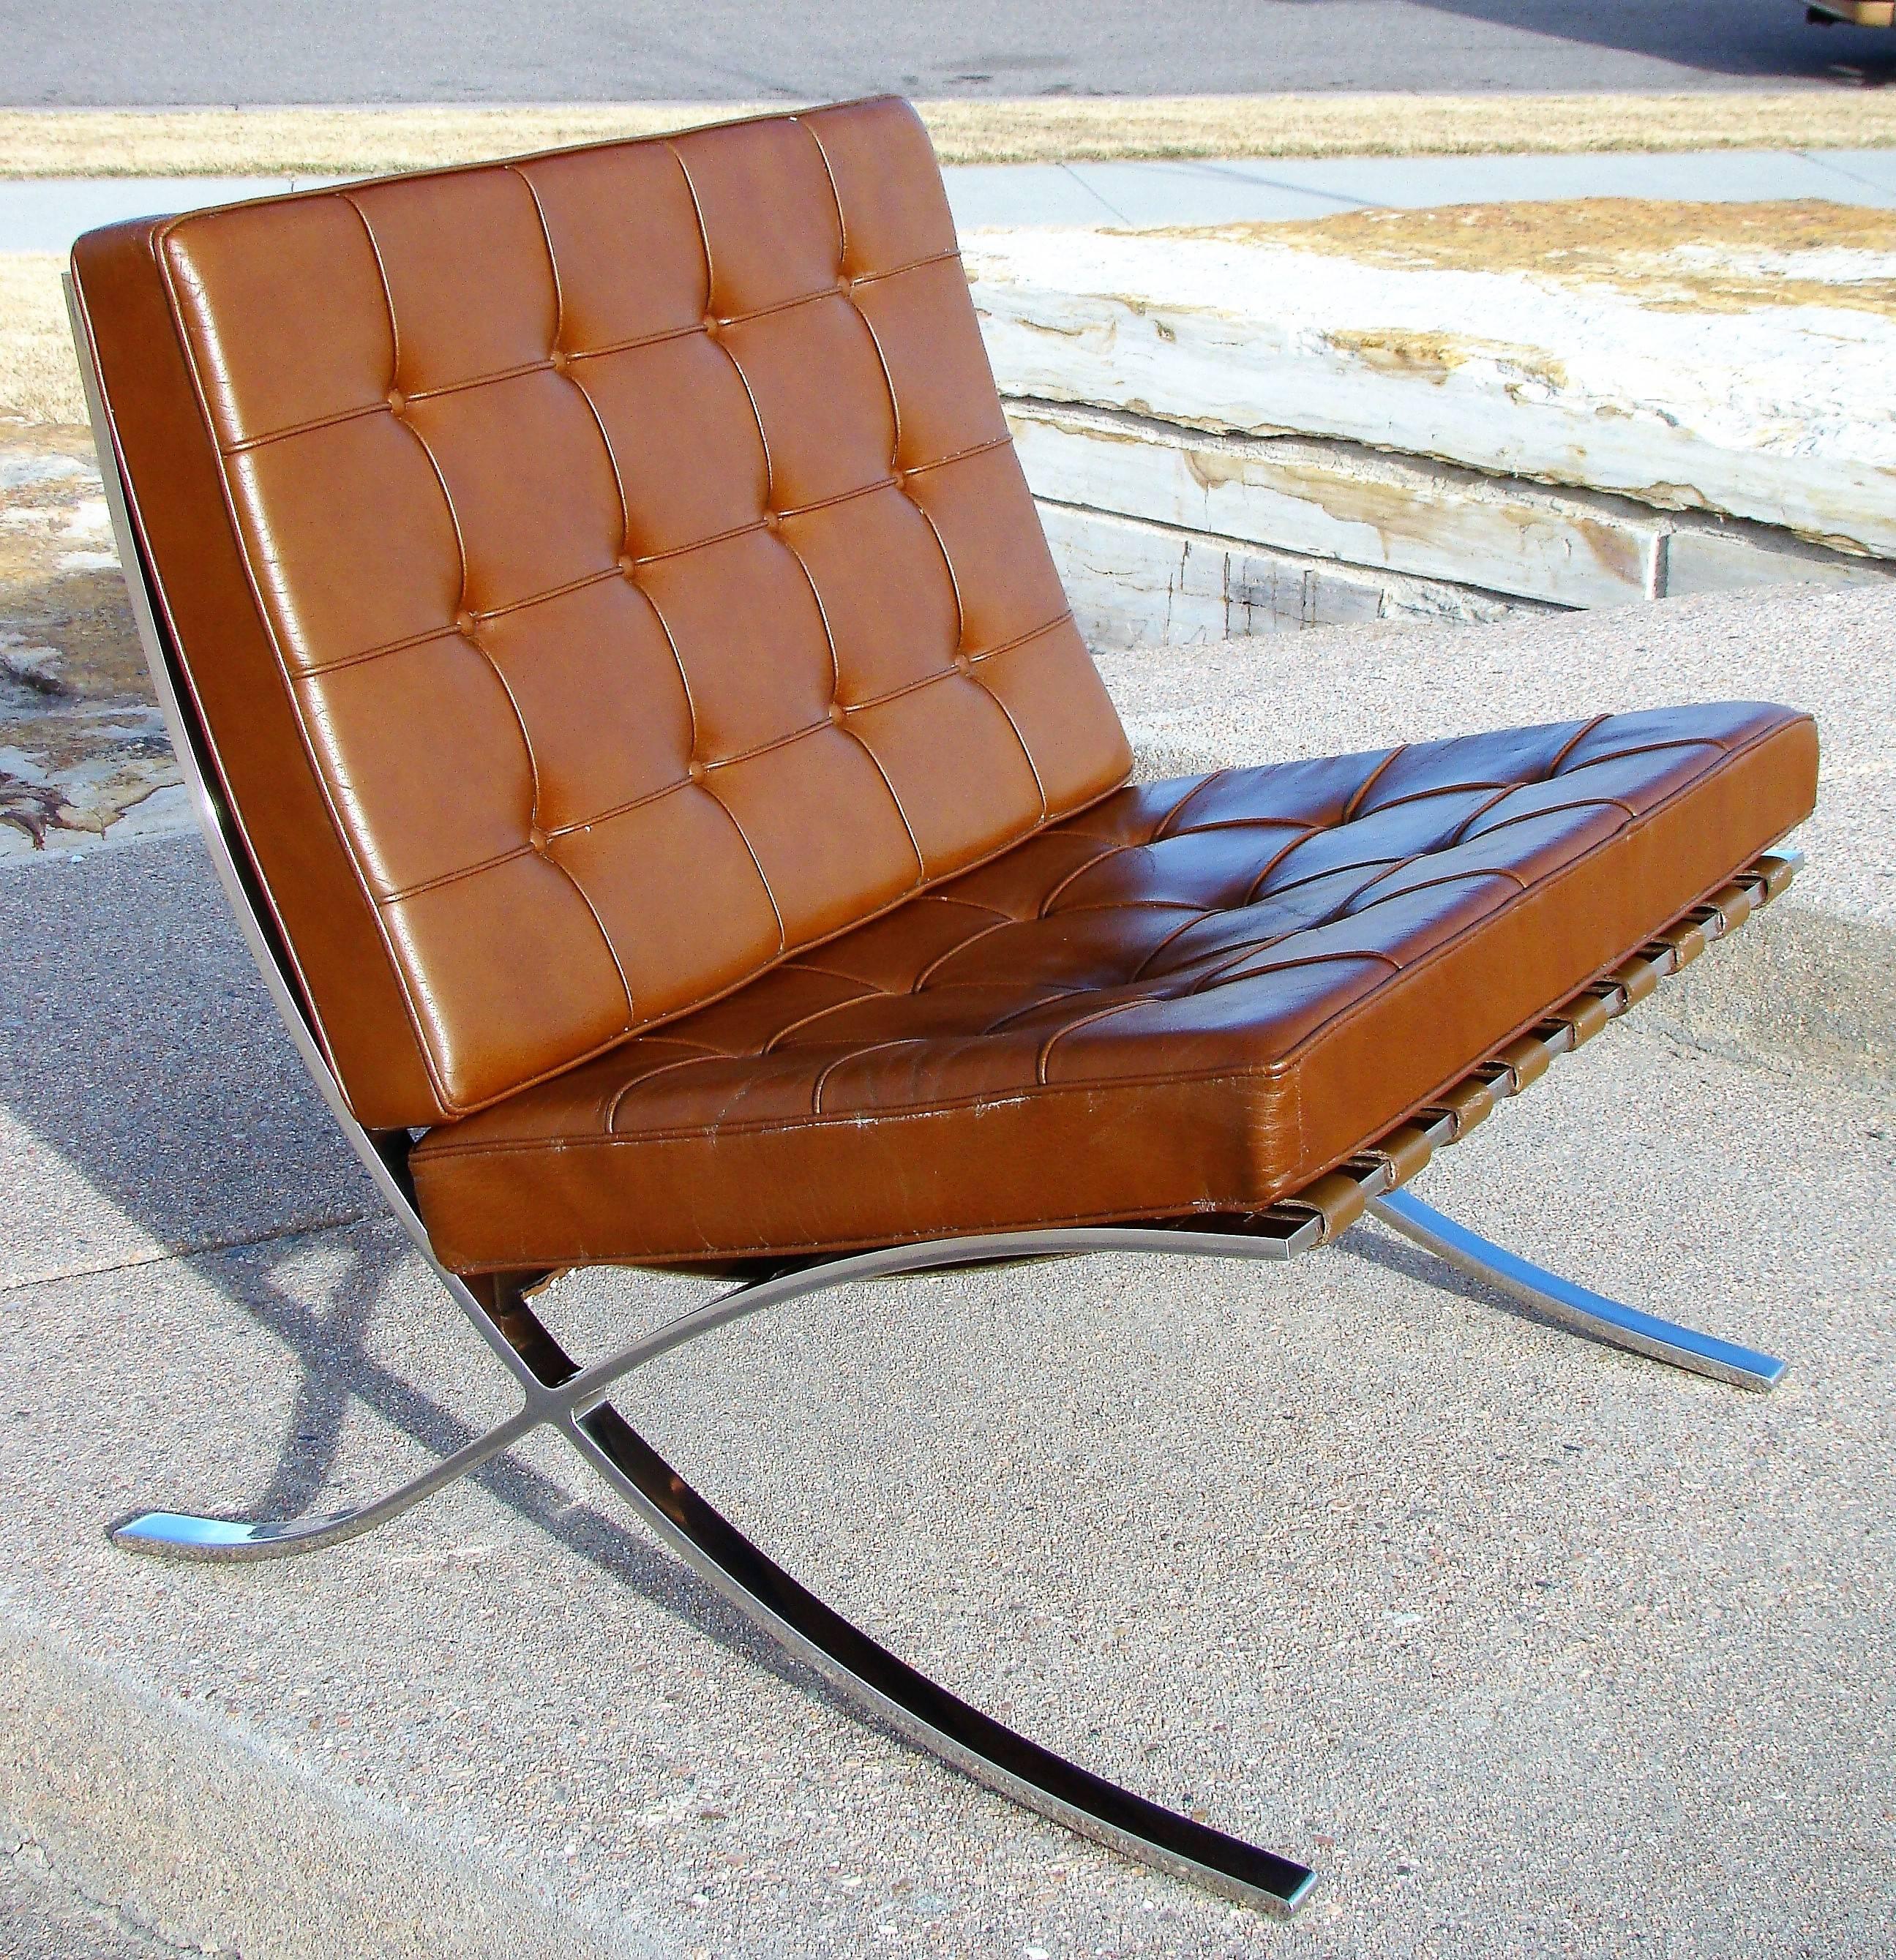 Original Knoll Barcelona Chair in Dark Caramel Leather and Stainless Steel 1